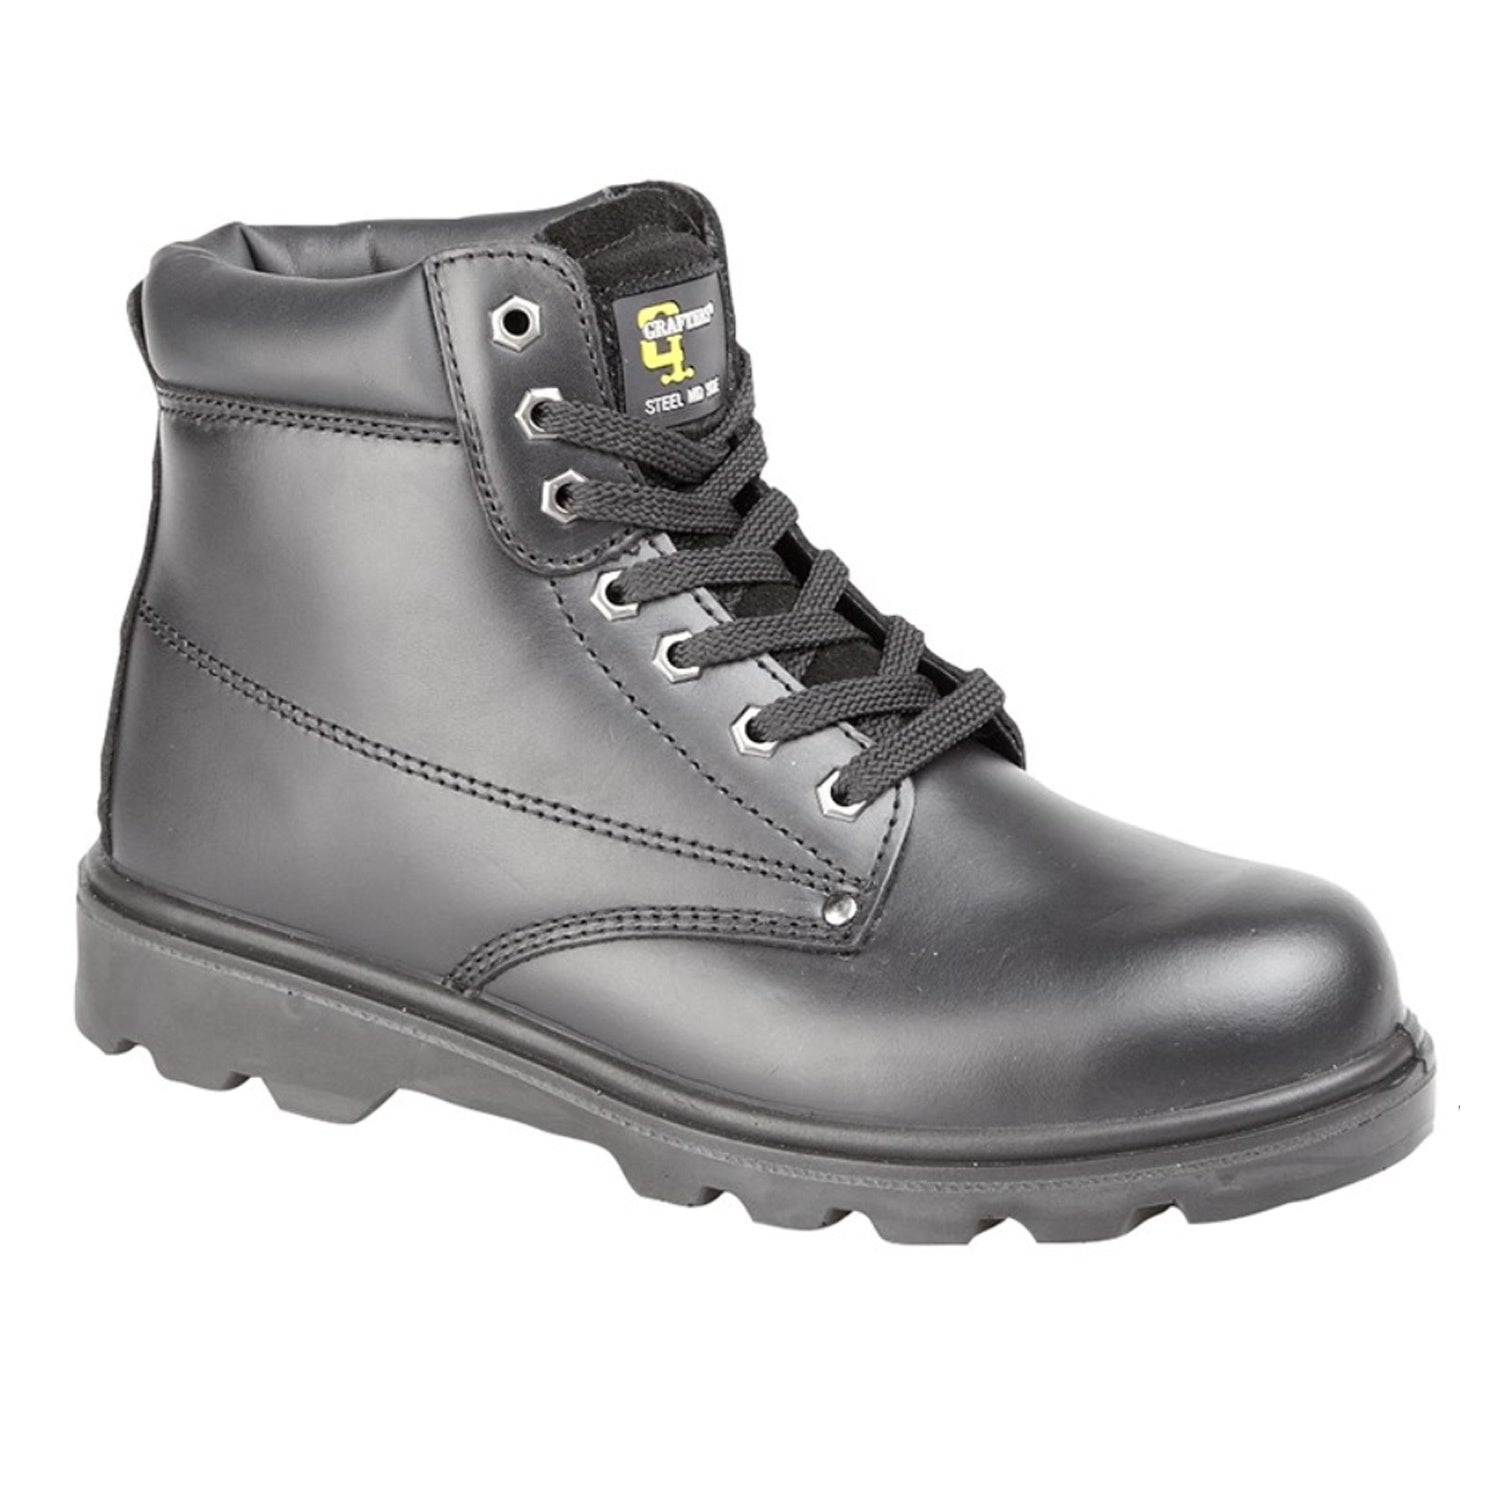 Grafters Safety Boots - M569 - Black 1